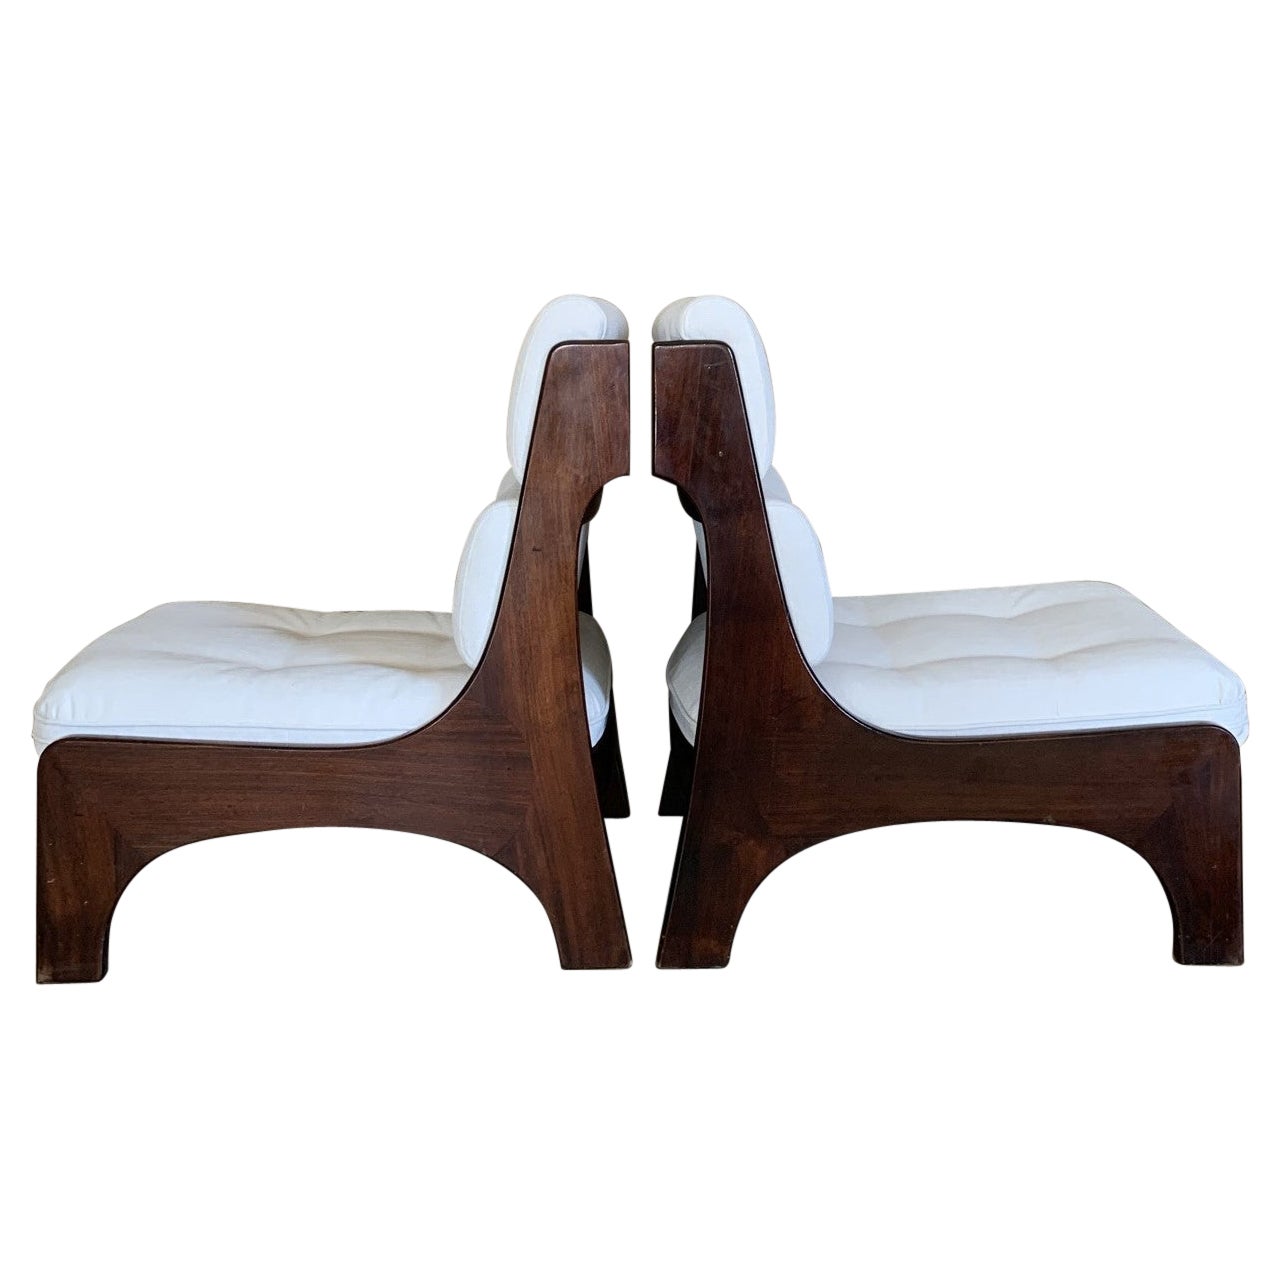 Pair of Vintage Italian Lounge Slipper Chairs, 1960s